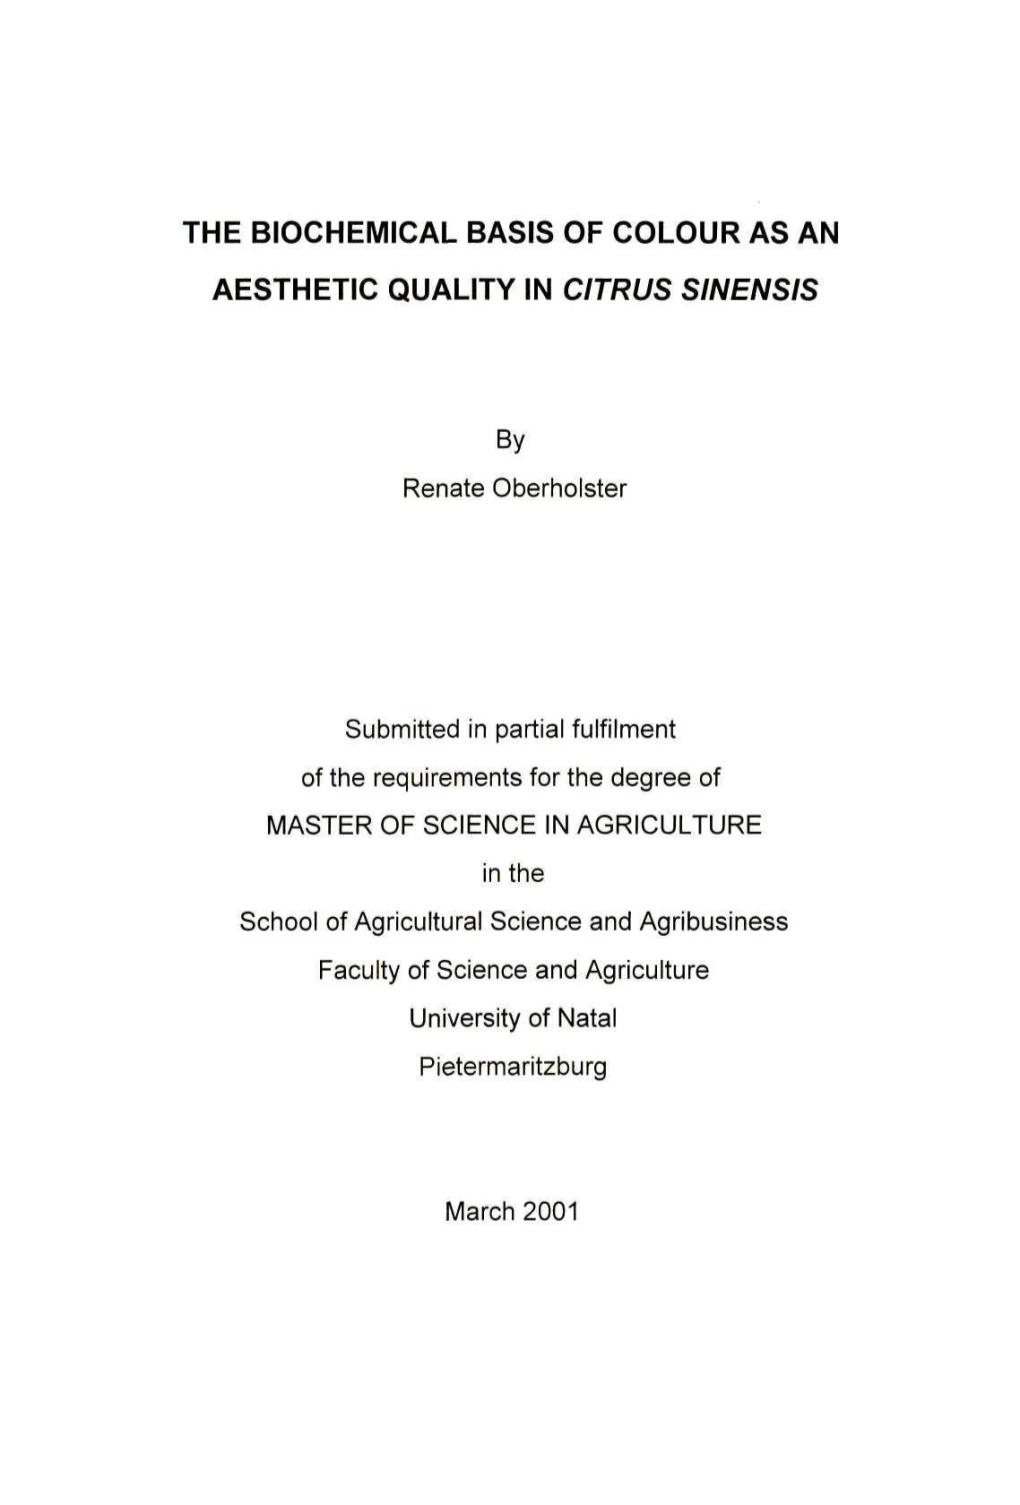 The Biochemical Basis of Colour As an Aesthetic Quality in Citrus Sinensis